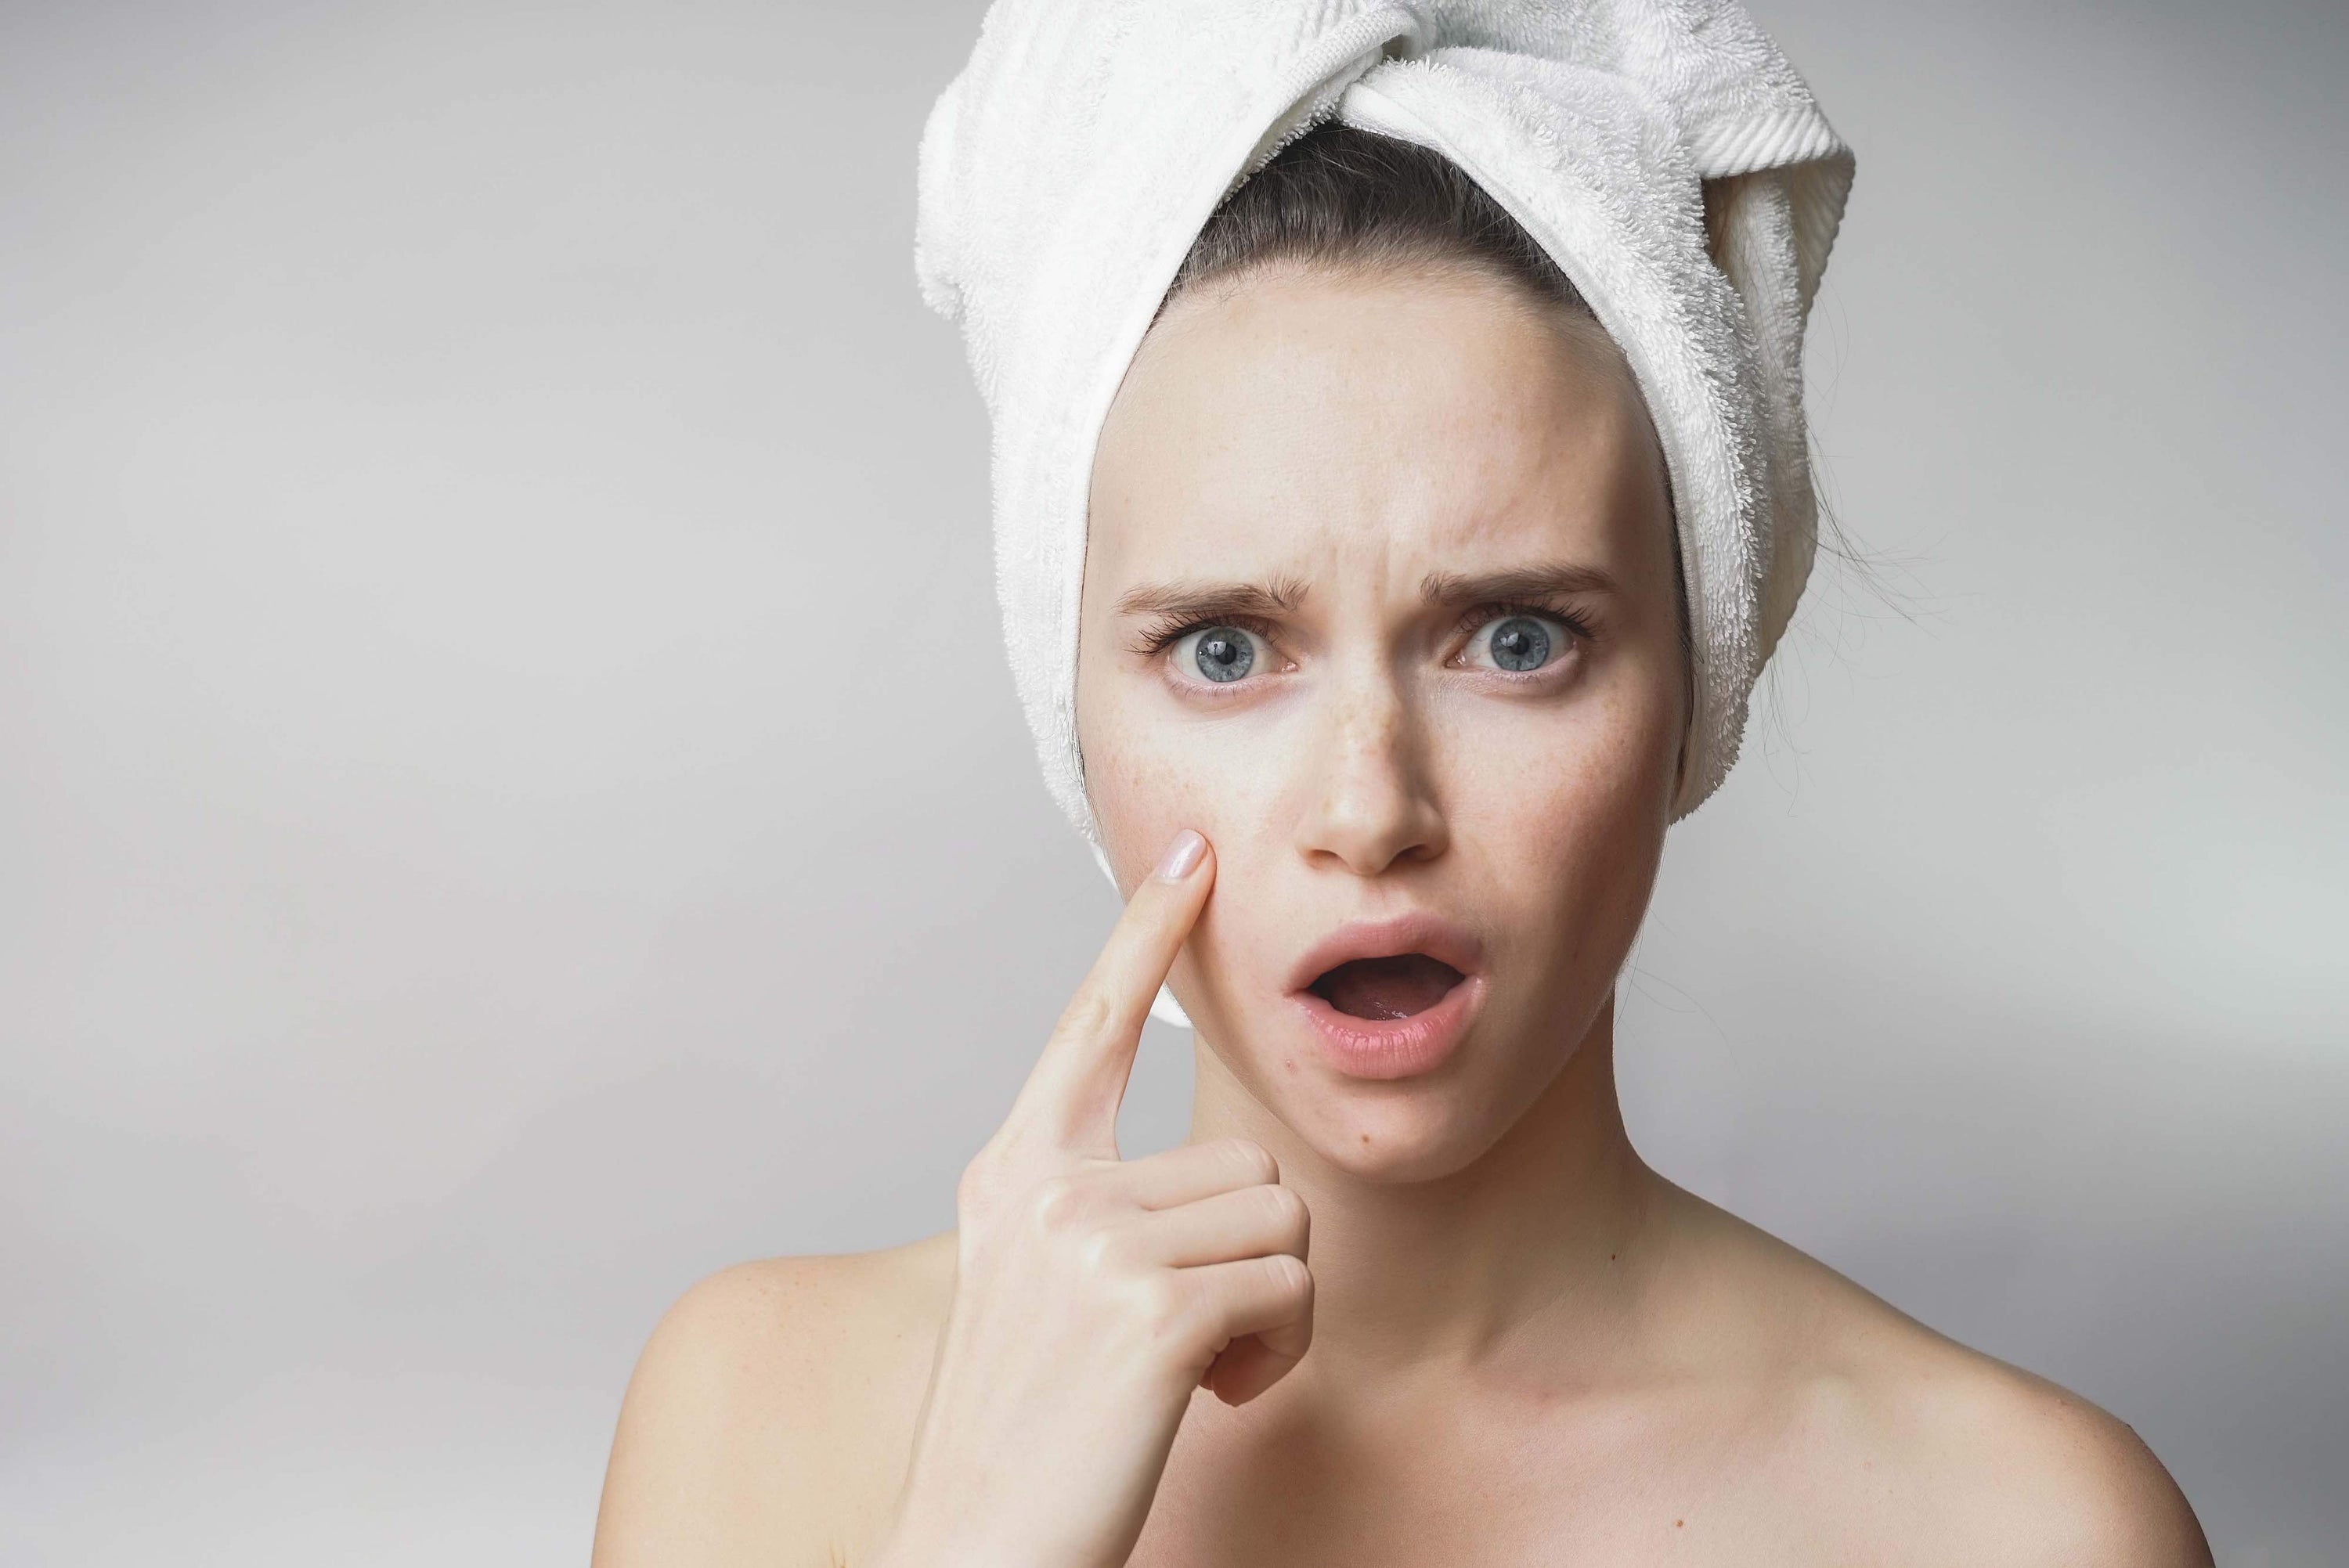 Woman with a white towel on her head is looking at her acne, and worrying about it.